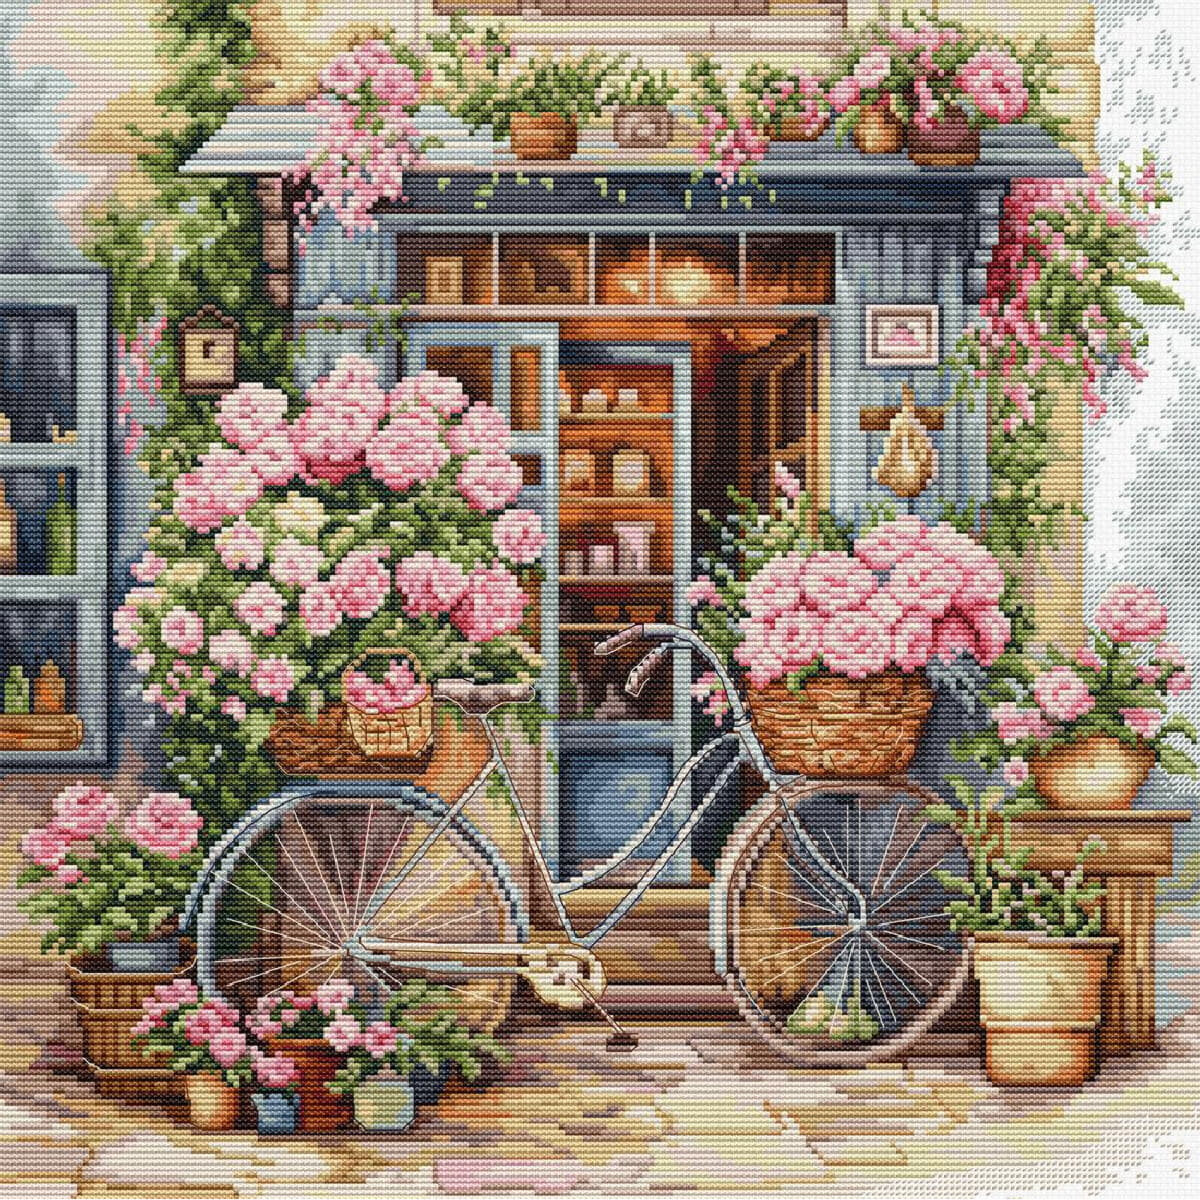 A vintage bicycle with woven baskets full of pink flowers...